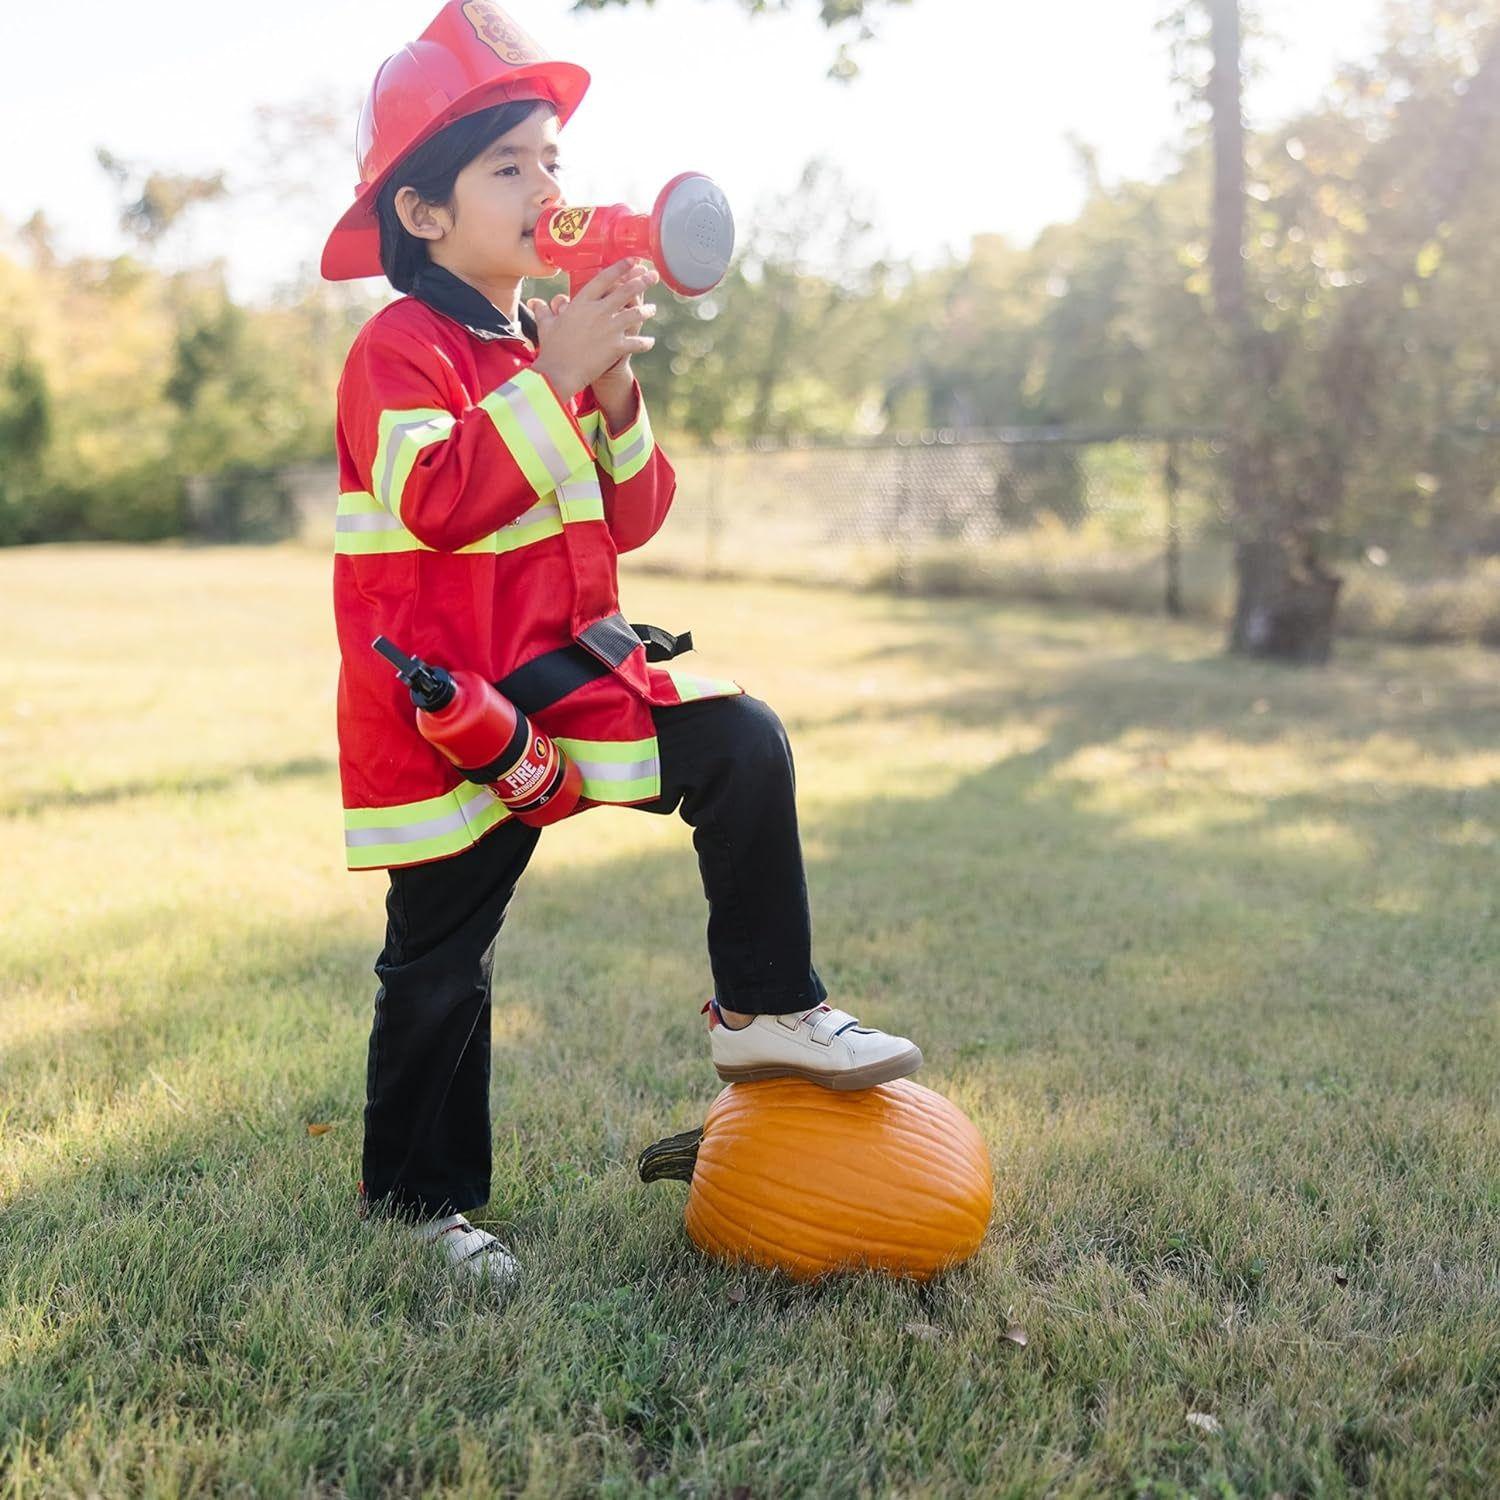 Fire Chief Role Play Dress-Up Set - Pretend Fire Fighter Outfit with Realistic Accessories, Firefighter Costume for Kids and Toddlers Ages 3+